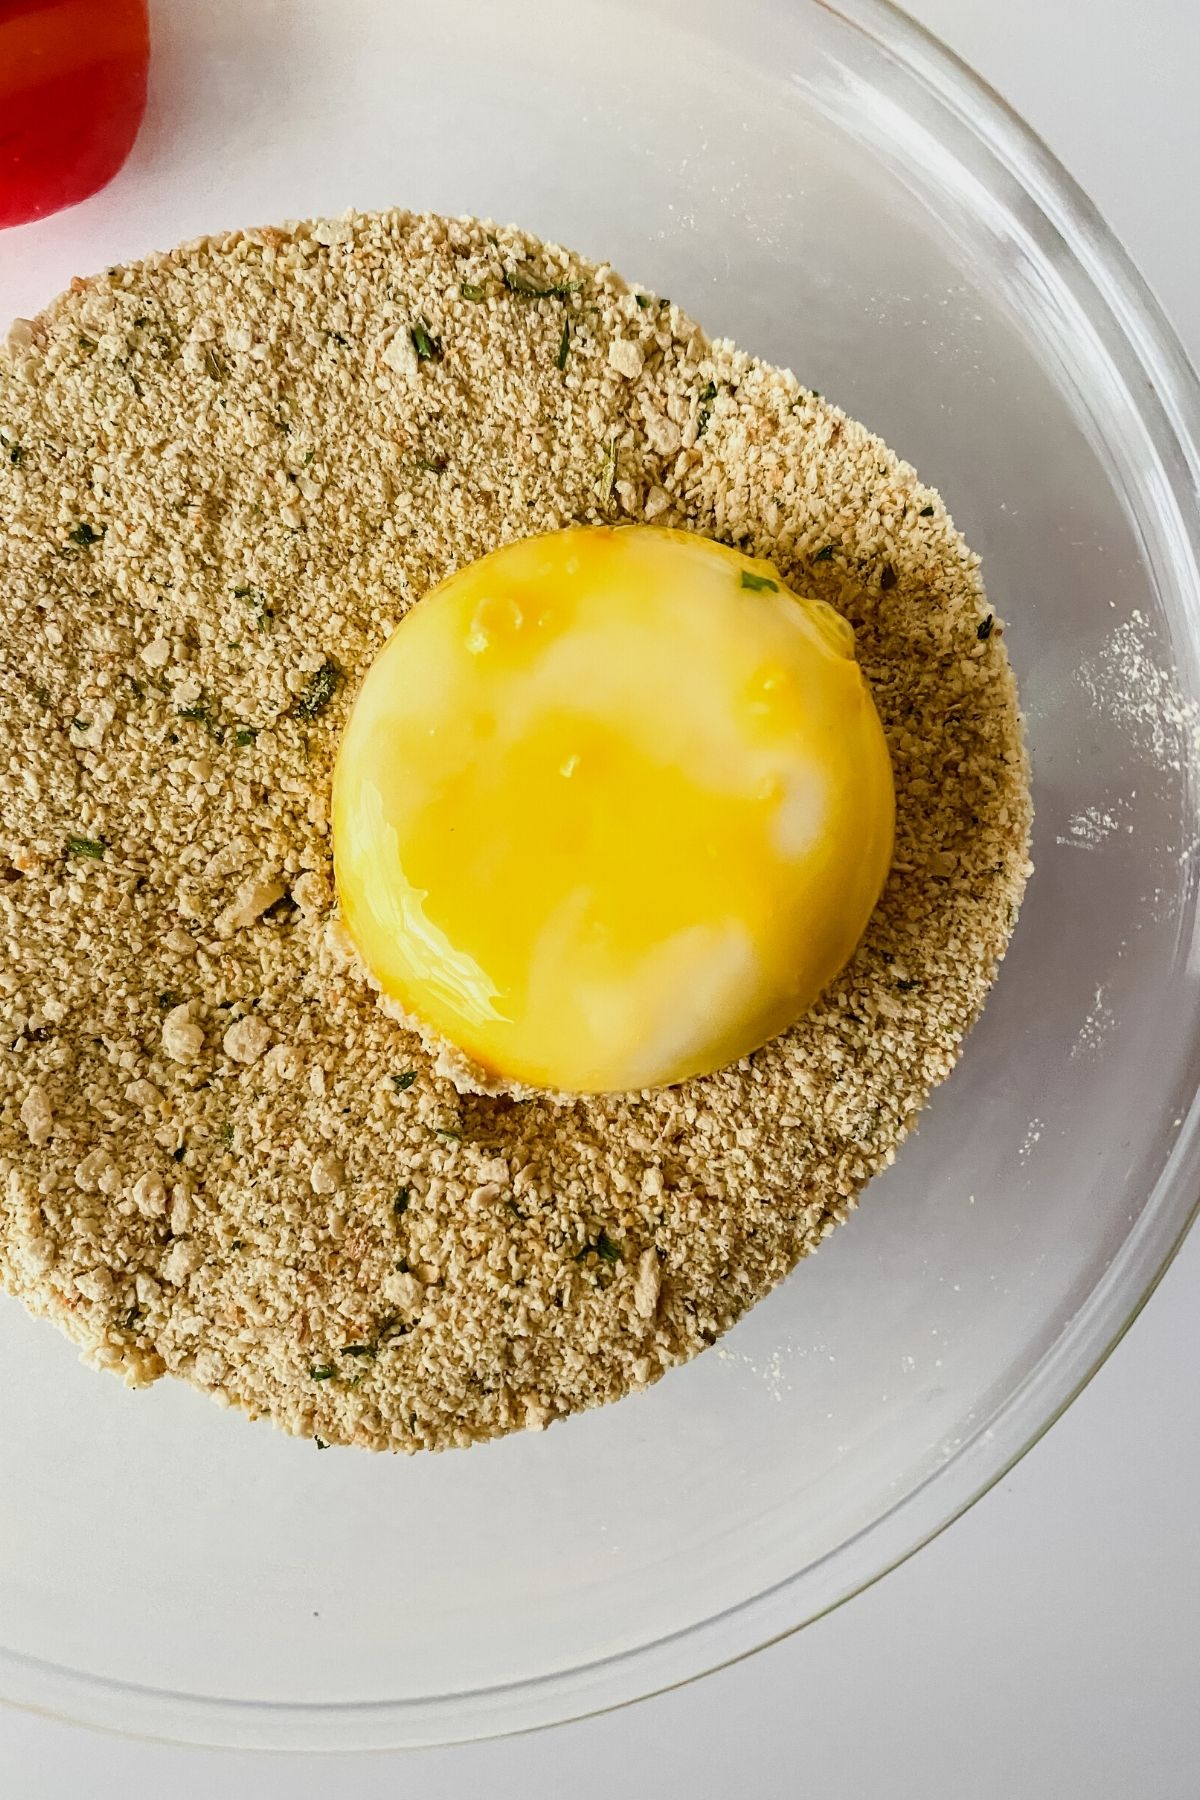 Dredging cheese round into breadcrumbs